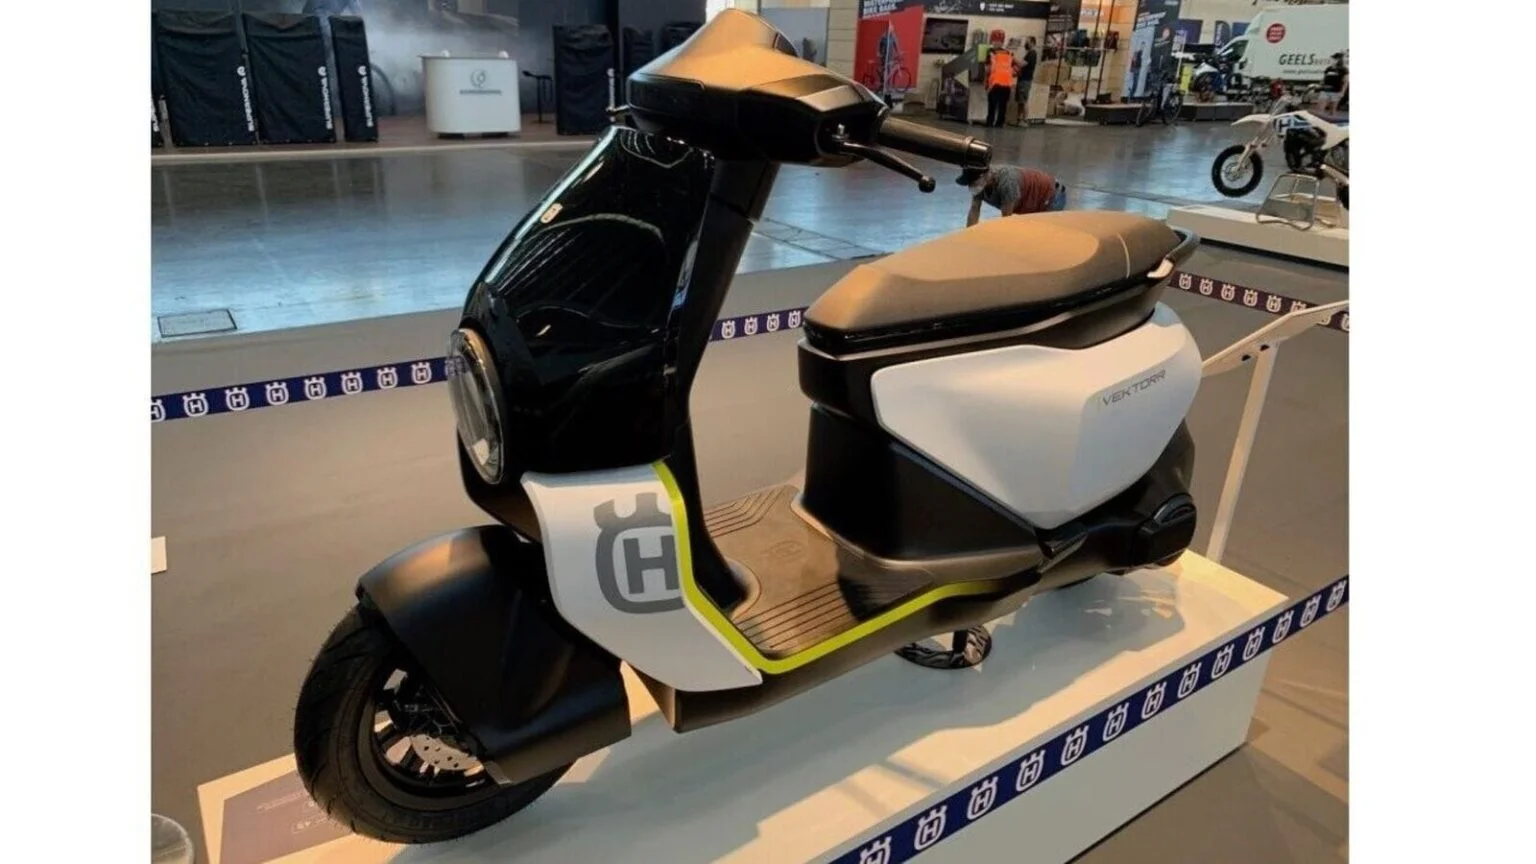 Scooter That Can Compete Electric Cars, Husqvarna Vektorr